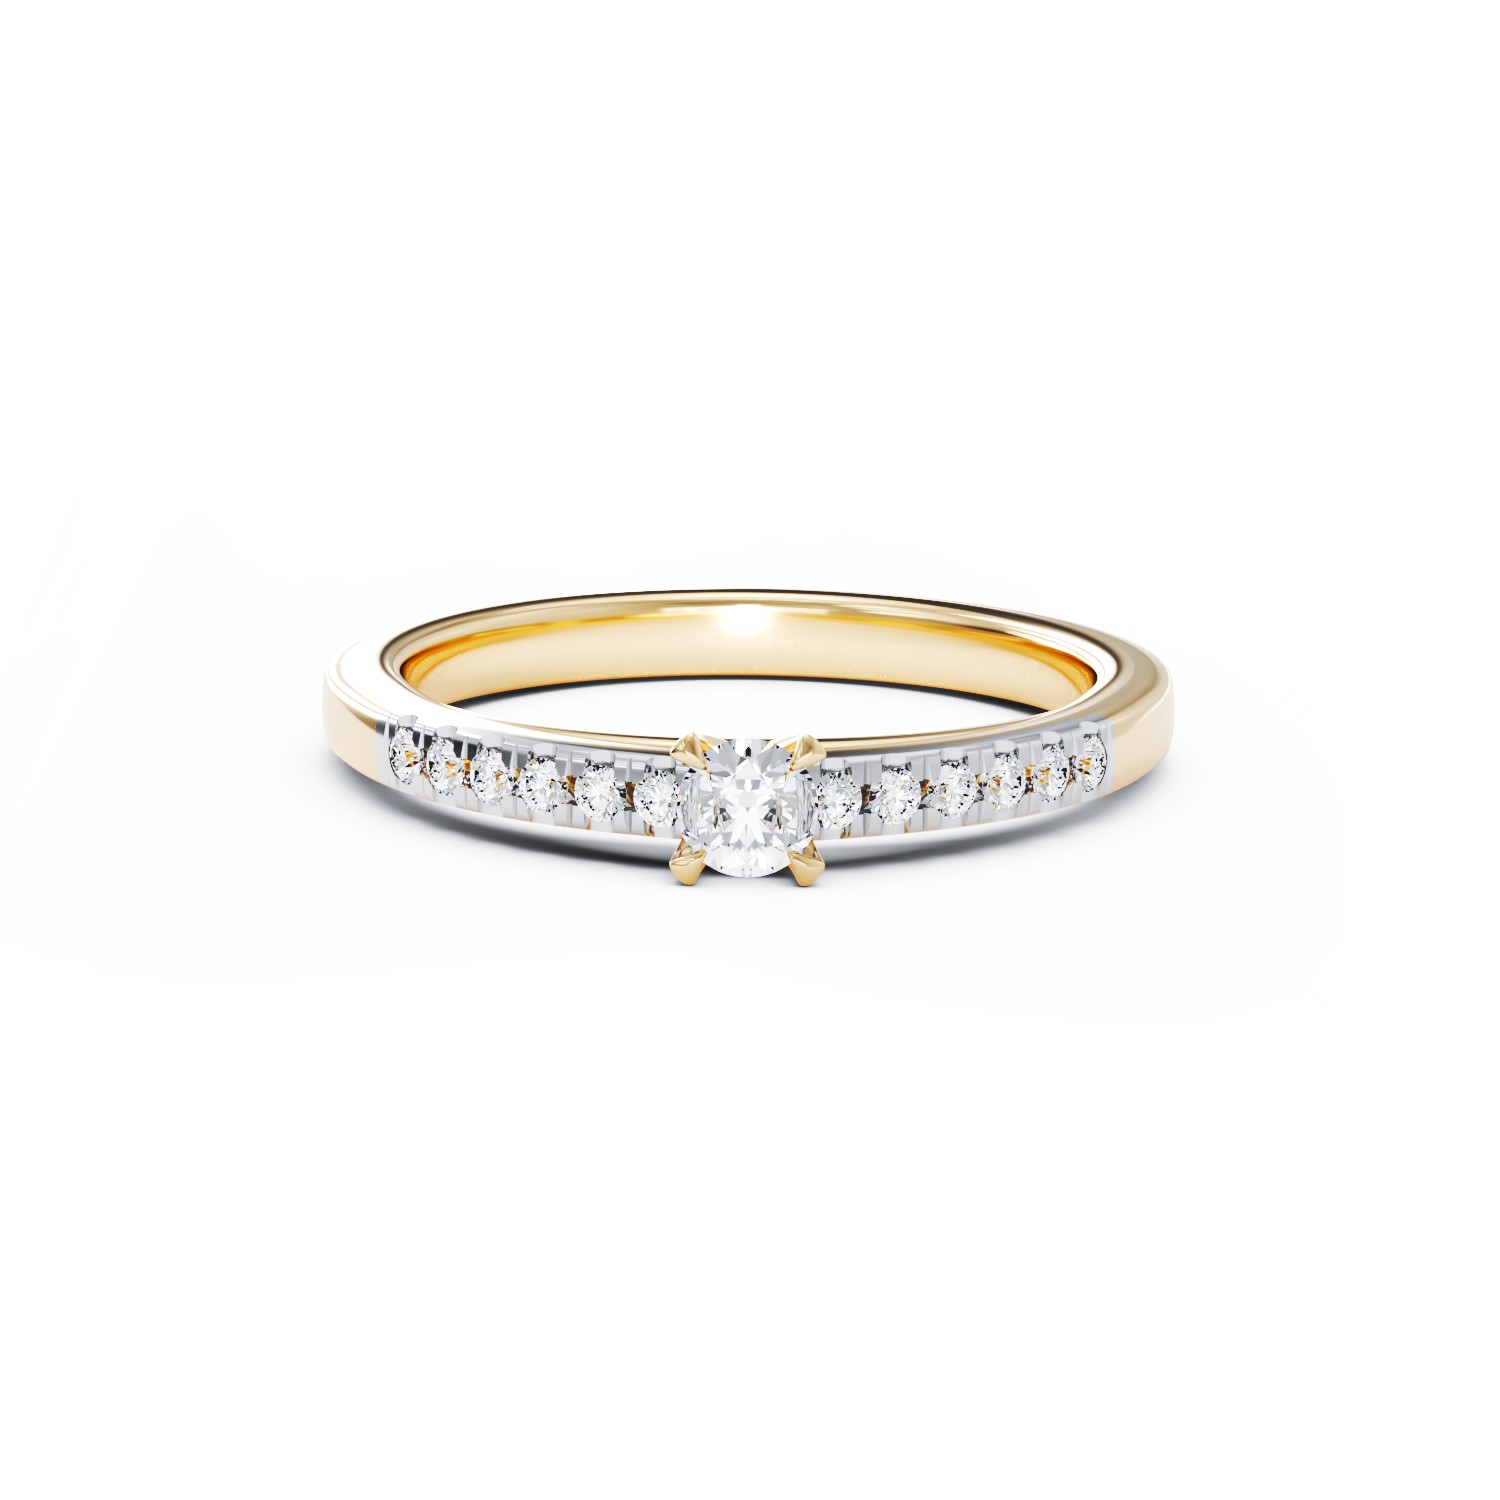 18K yellow gold engagement ring with 0.33ct diamond and 0.13ct diamonds